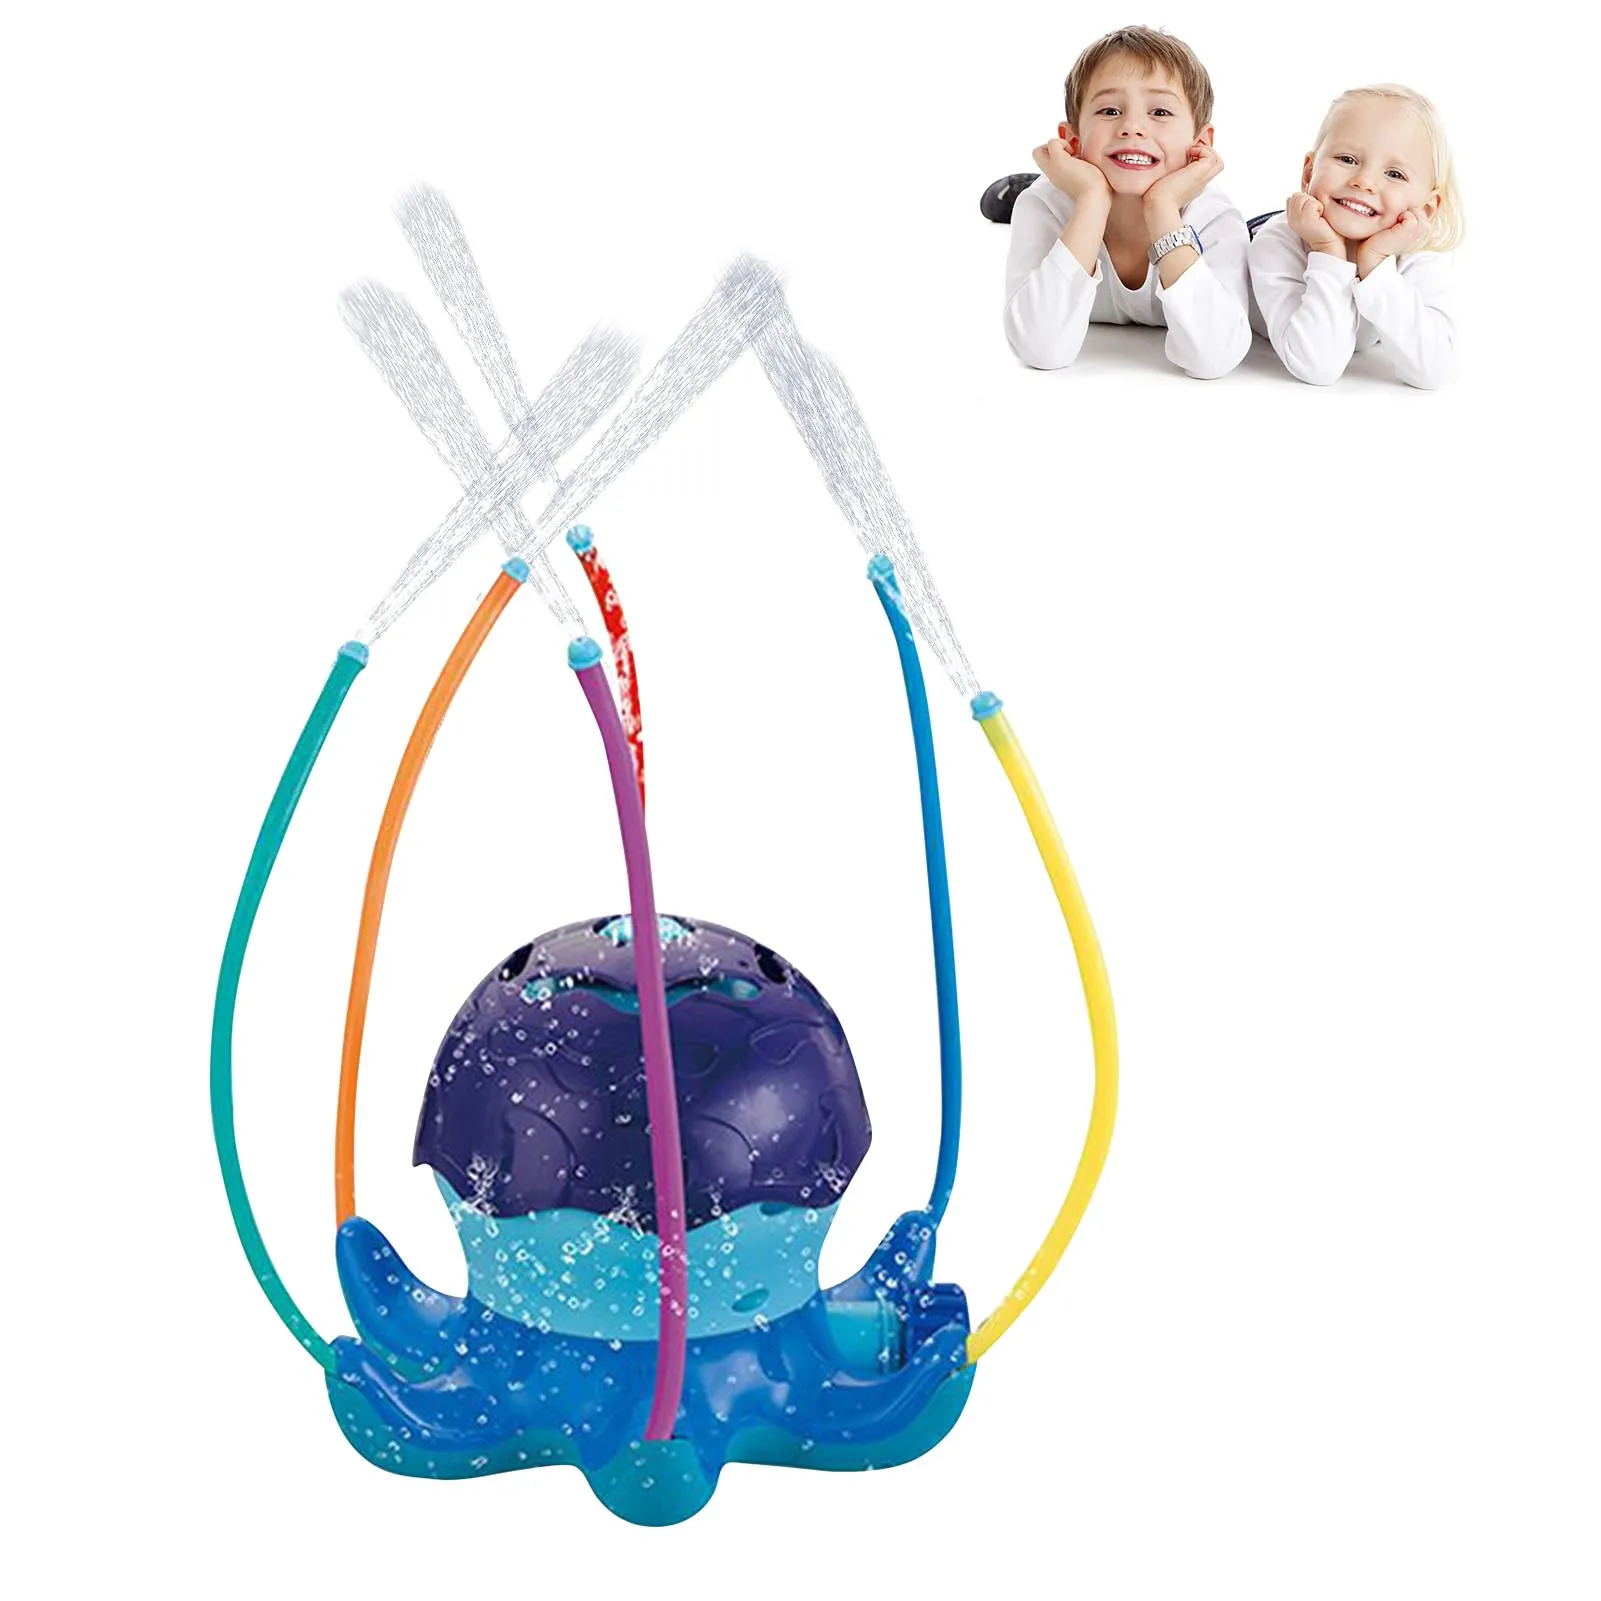 

Water Sprinkler For Kids Rotating Octopus Sprinkler With Multiple Wiggle Tubes Splashing Fun Toy For Kids And Toddlers Sprays Up